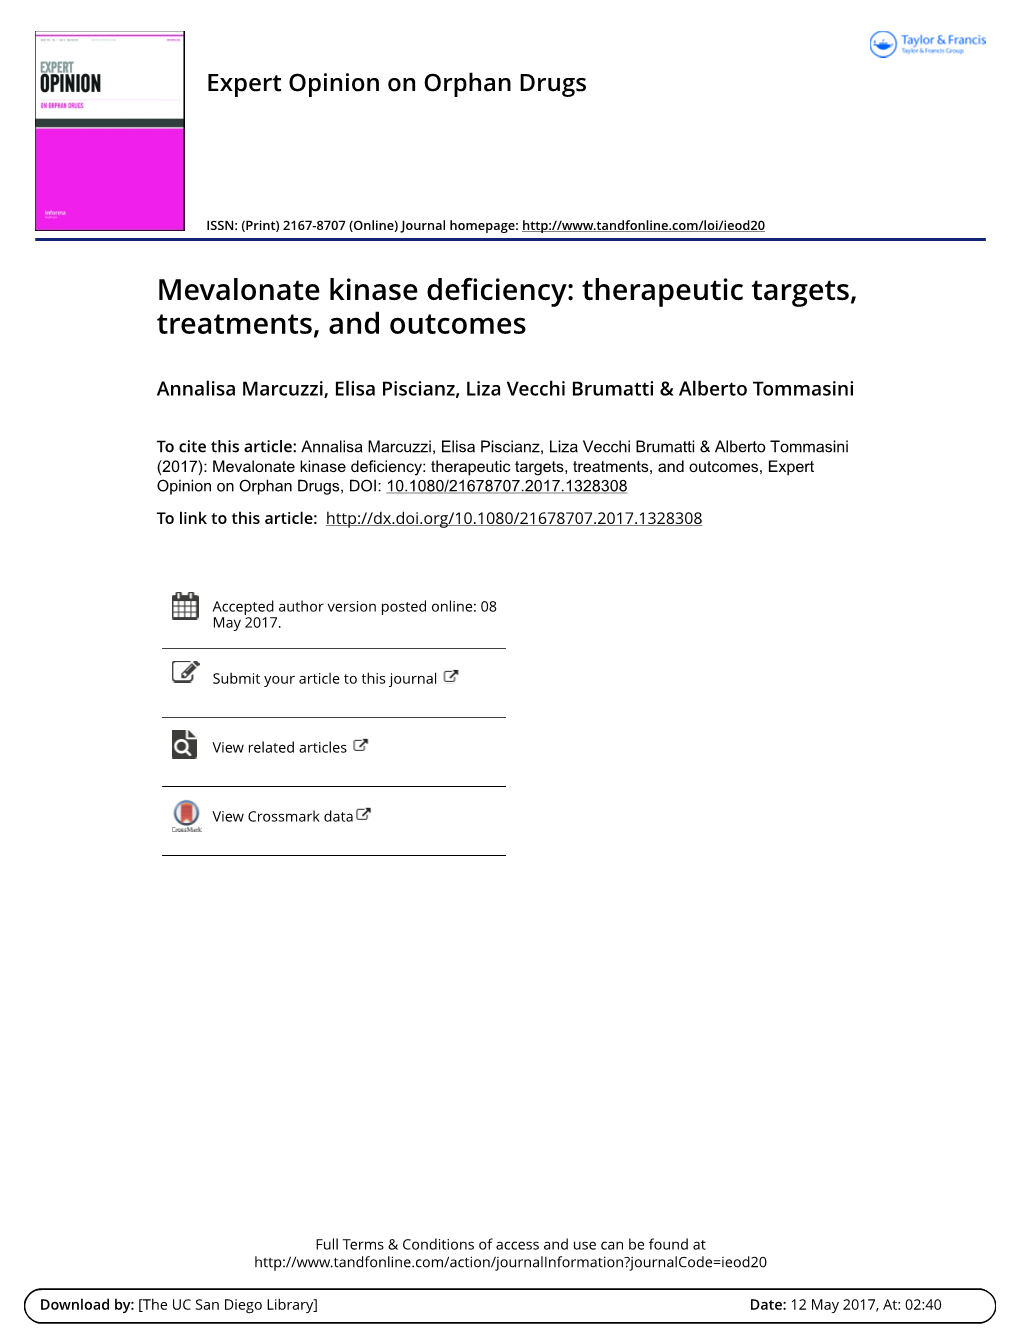 Mevalonate Kinase Deficiency: Therapeutic Targets, Treatments, and Outcomes